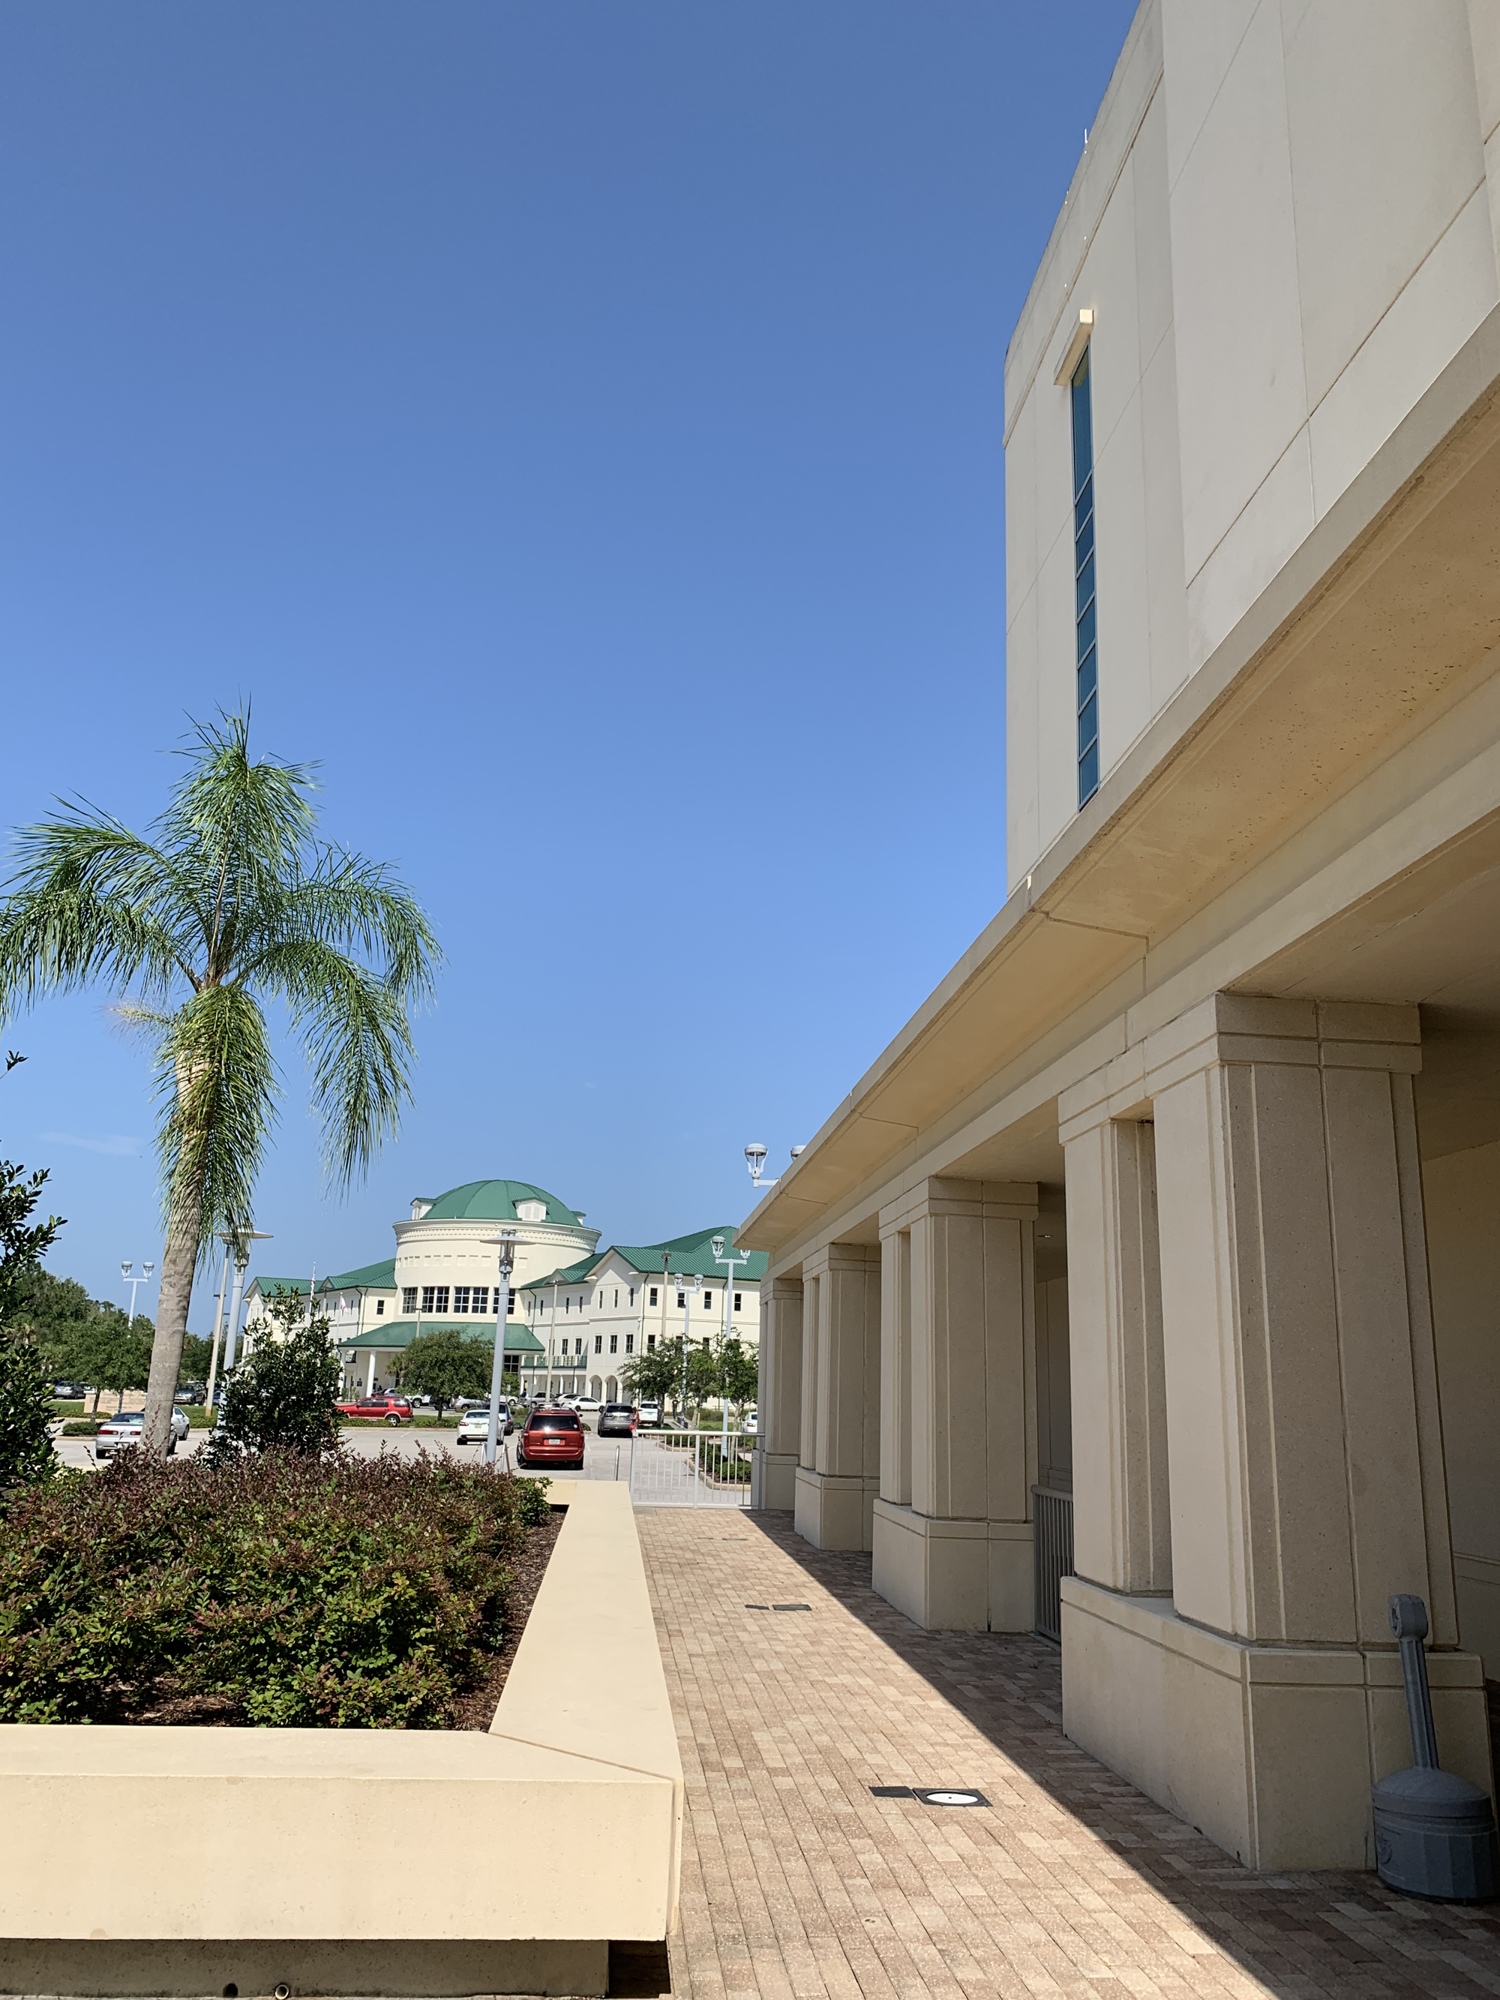 The Flagler County Government Services Building, which is where the County Commission meets, is across the parking lot from the Kim C. Hammond Justice Center. Photo by Brian McMillan